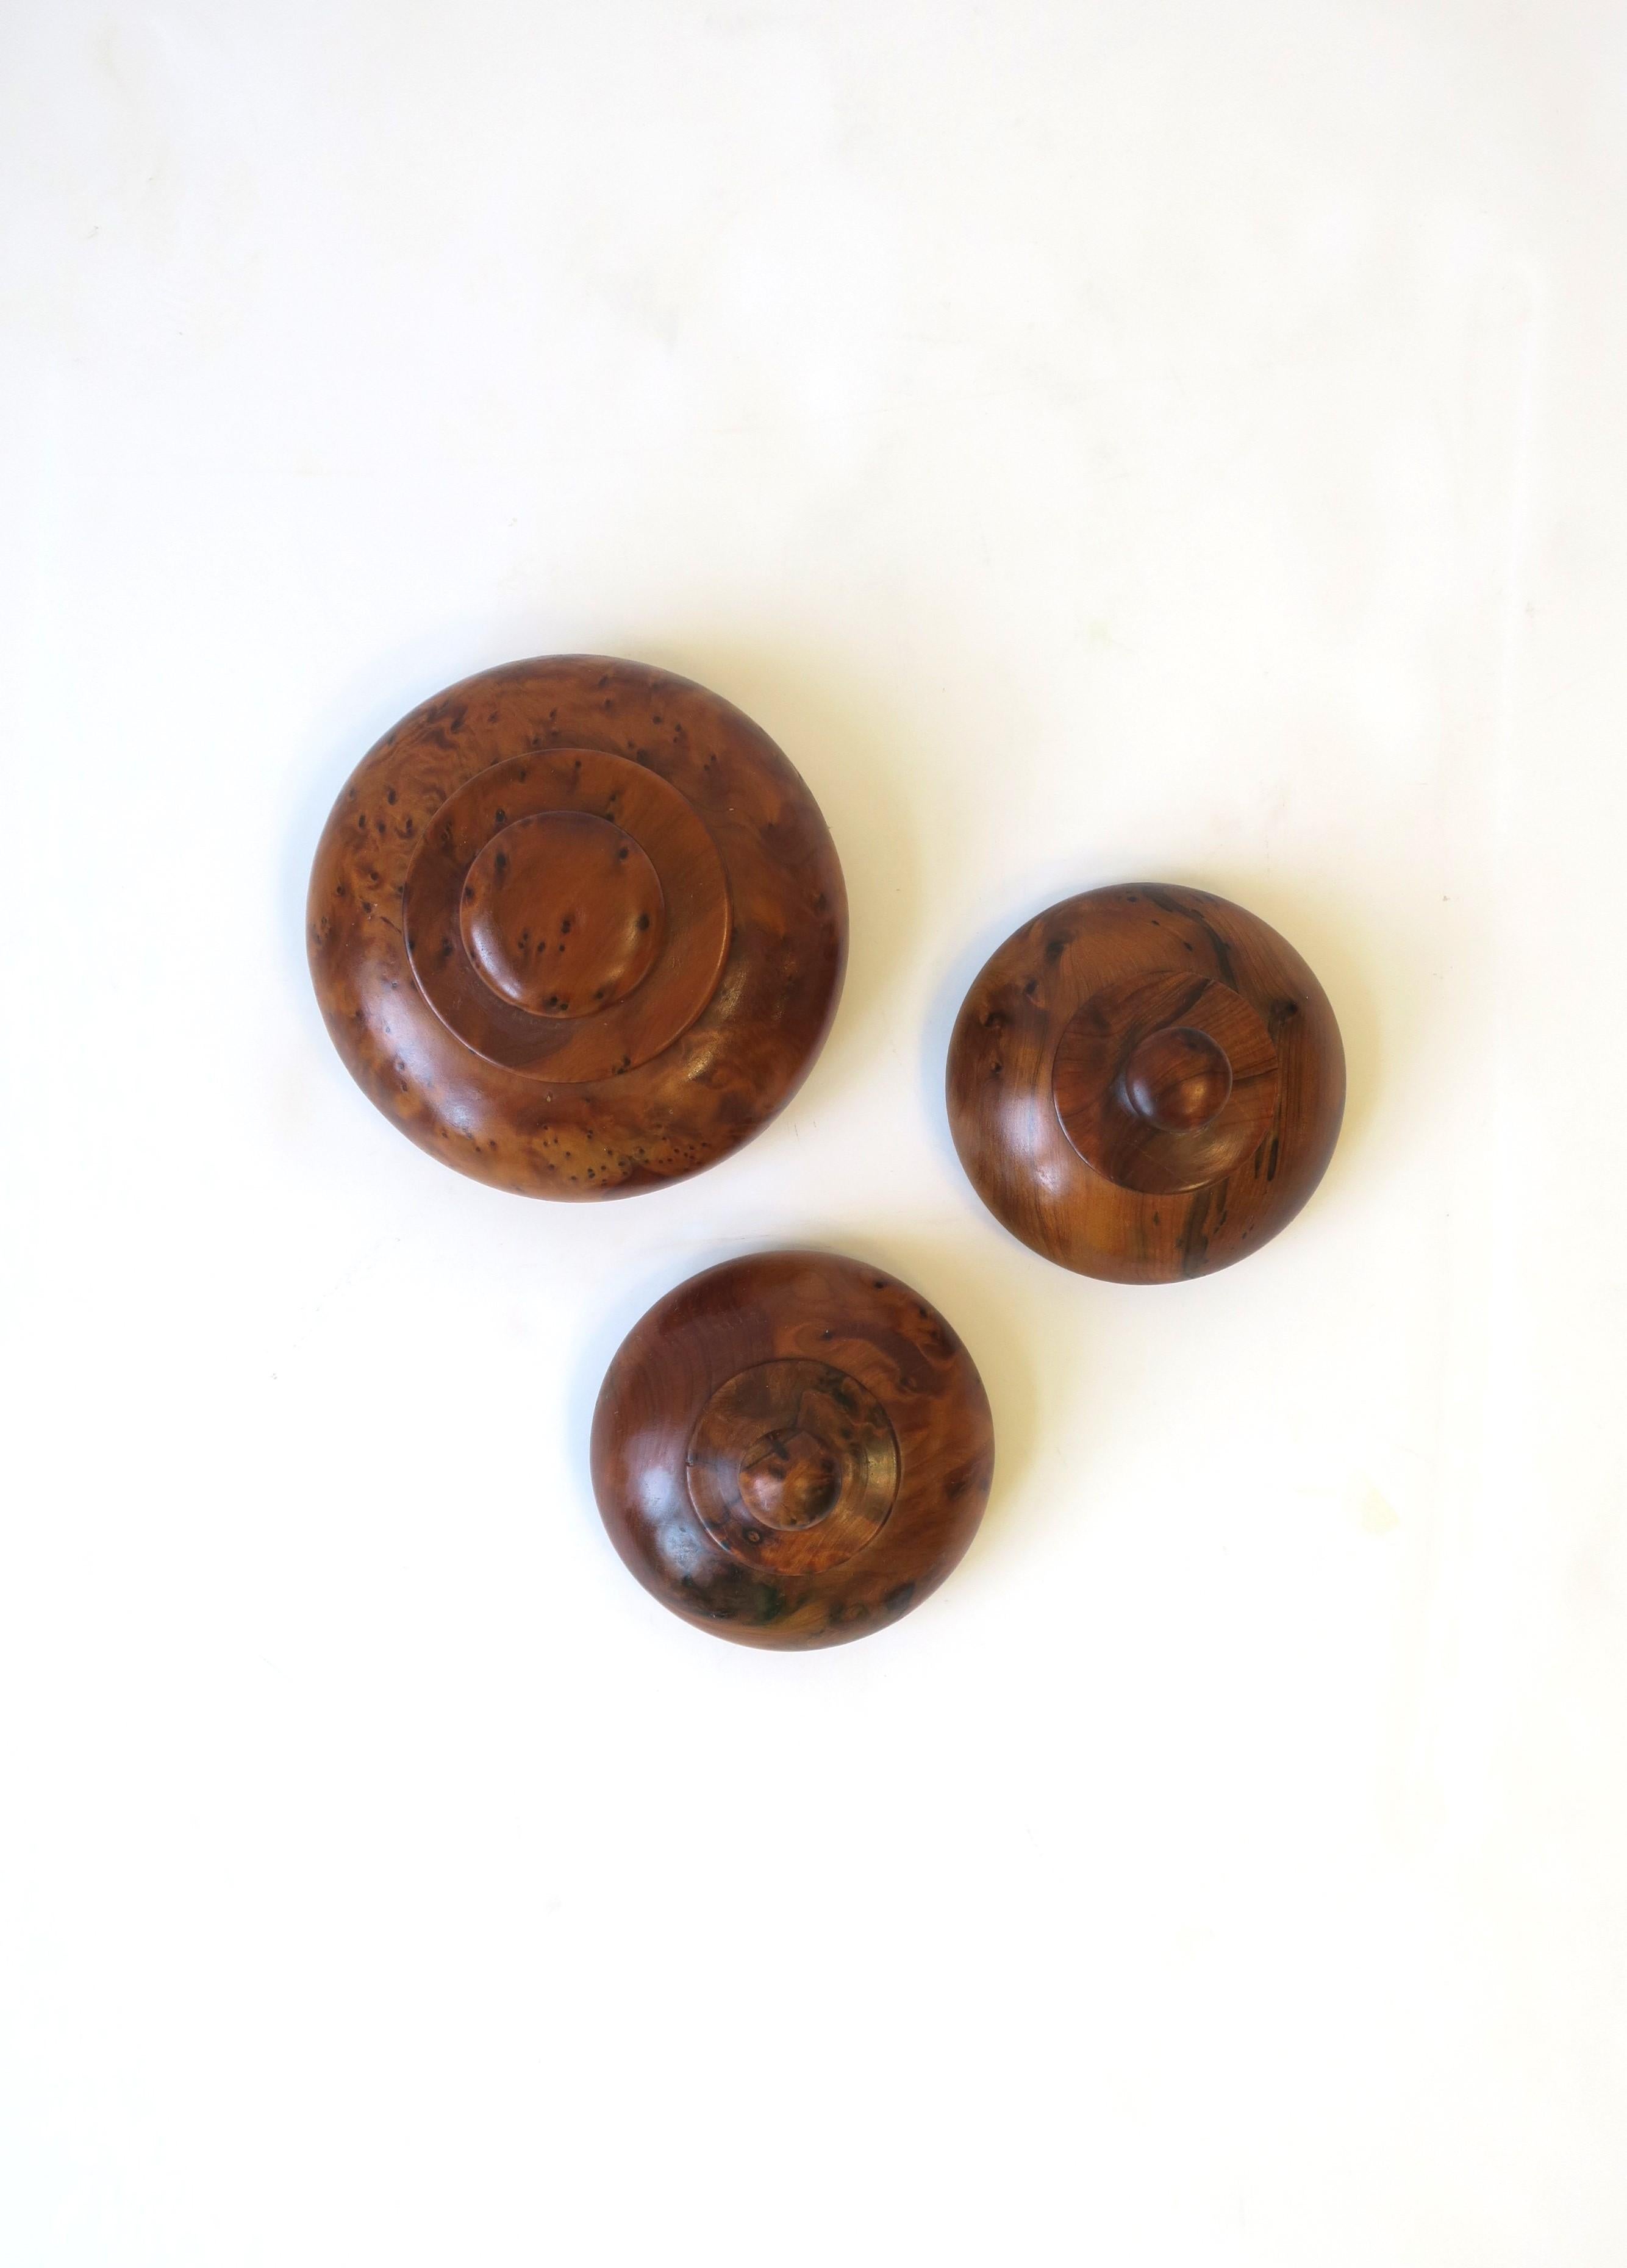 A set of three (3) round burl wood boxes with lids. A great set to hold items on a desk, vanity, nightstand table, dresser, etc. 

Dimensions: 
4.5